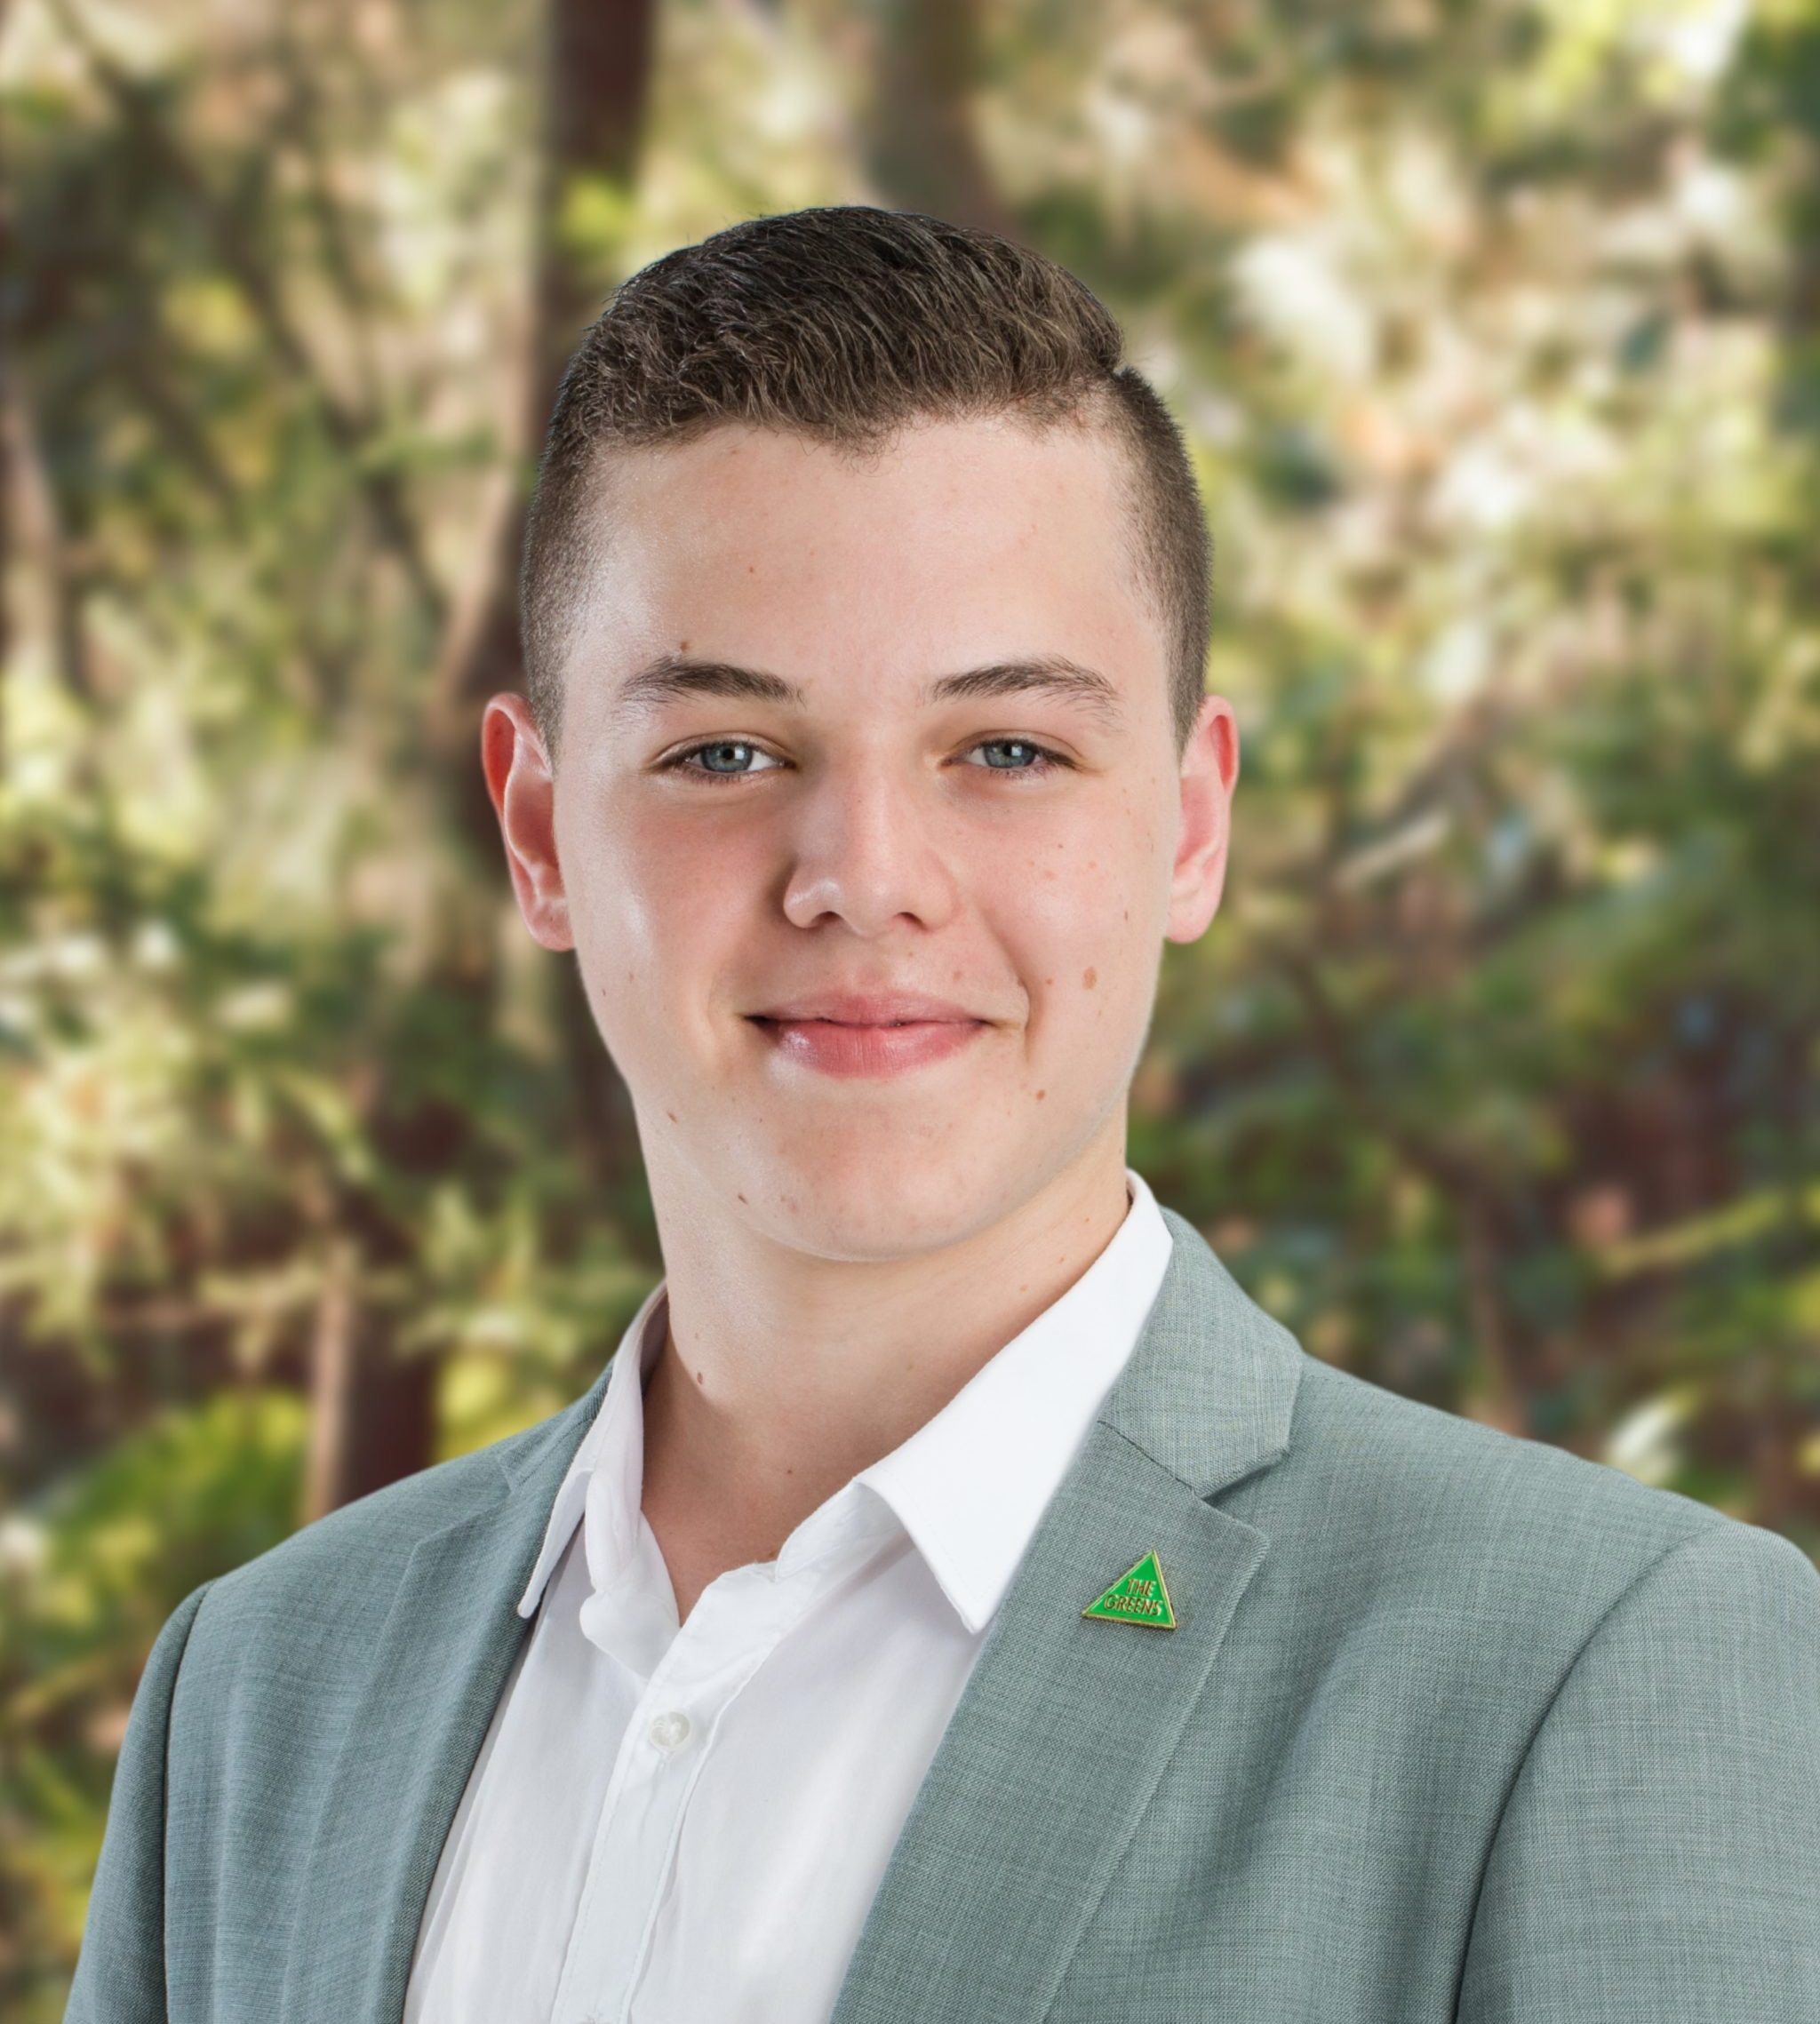 Peter Strong, 2021 Greens candidate for Bayside Council, Mascot Ward